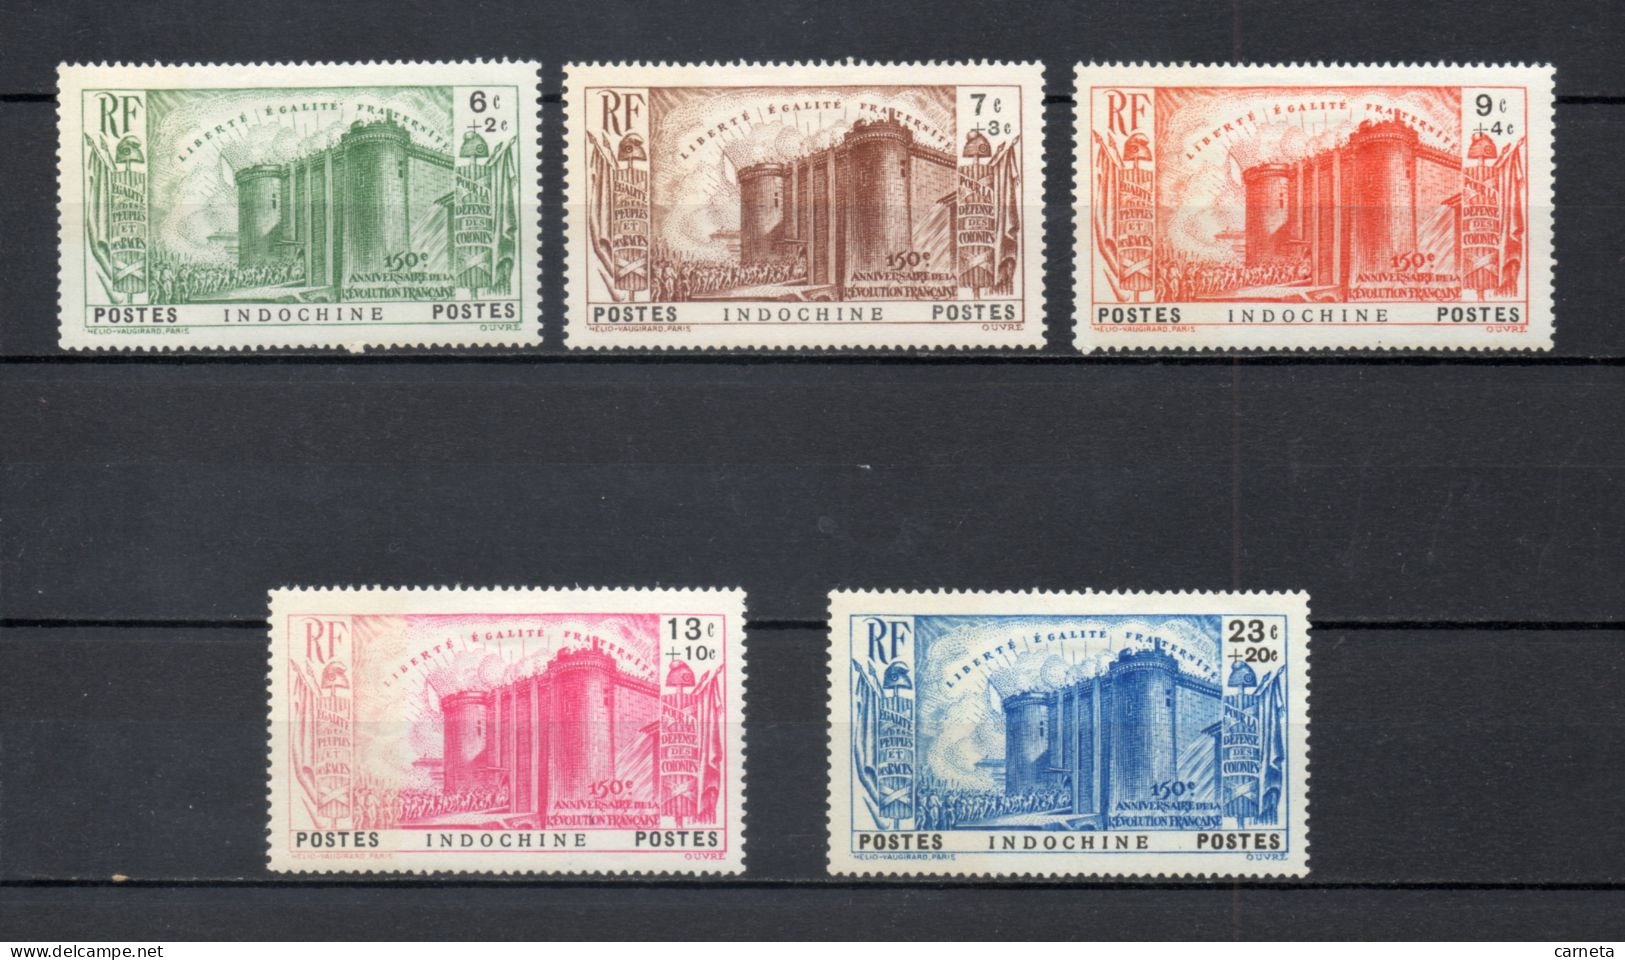 INDOCHINE  N° 209 à 213    NEUFS AVEC CHARNIERES  COTE 75.00€    REVOLUTION FRANCAISE - Unused Stamps